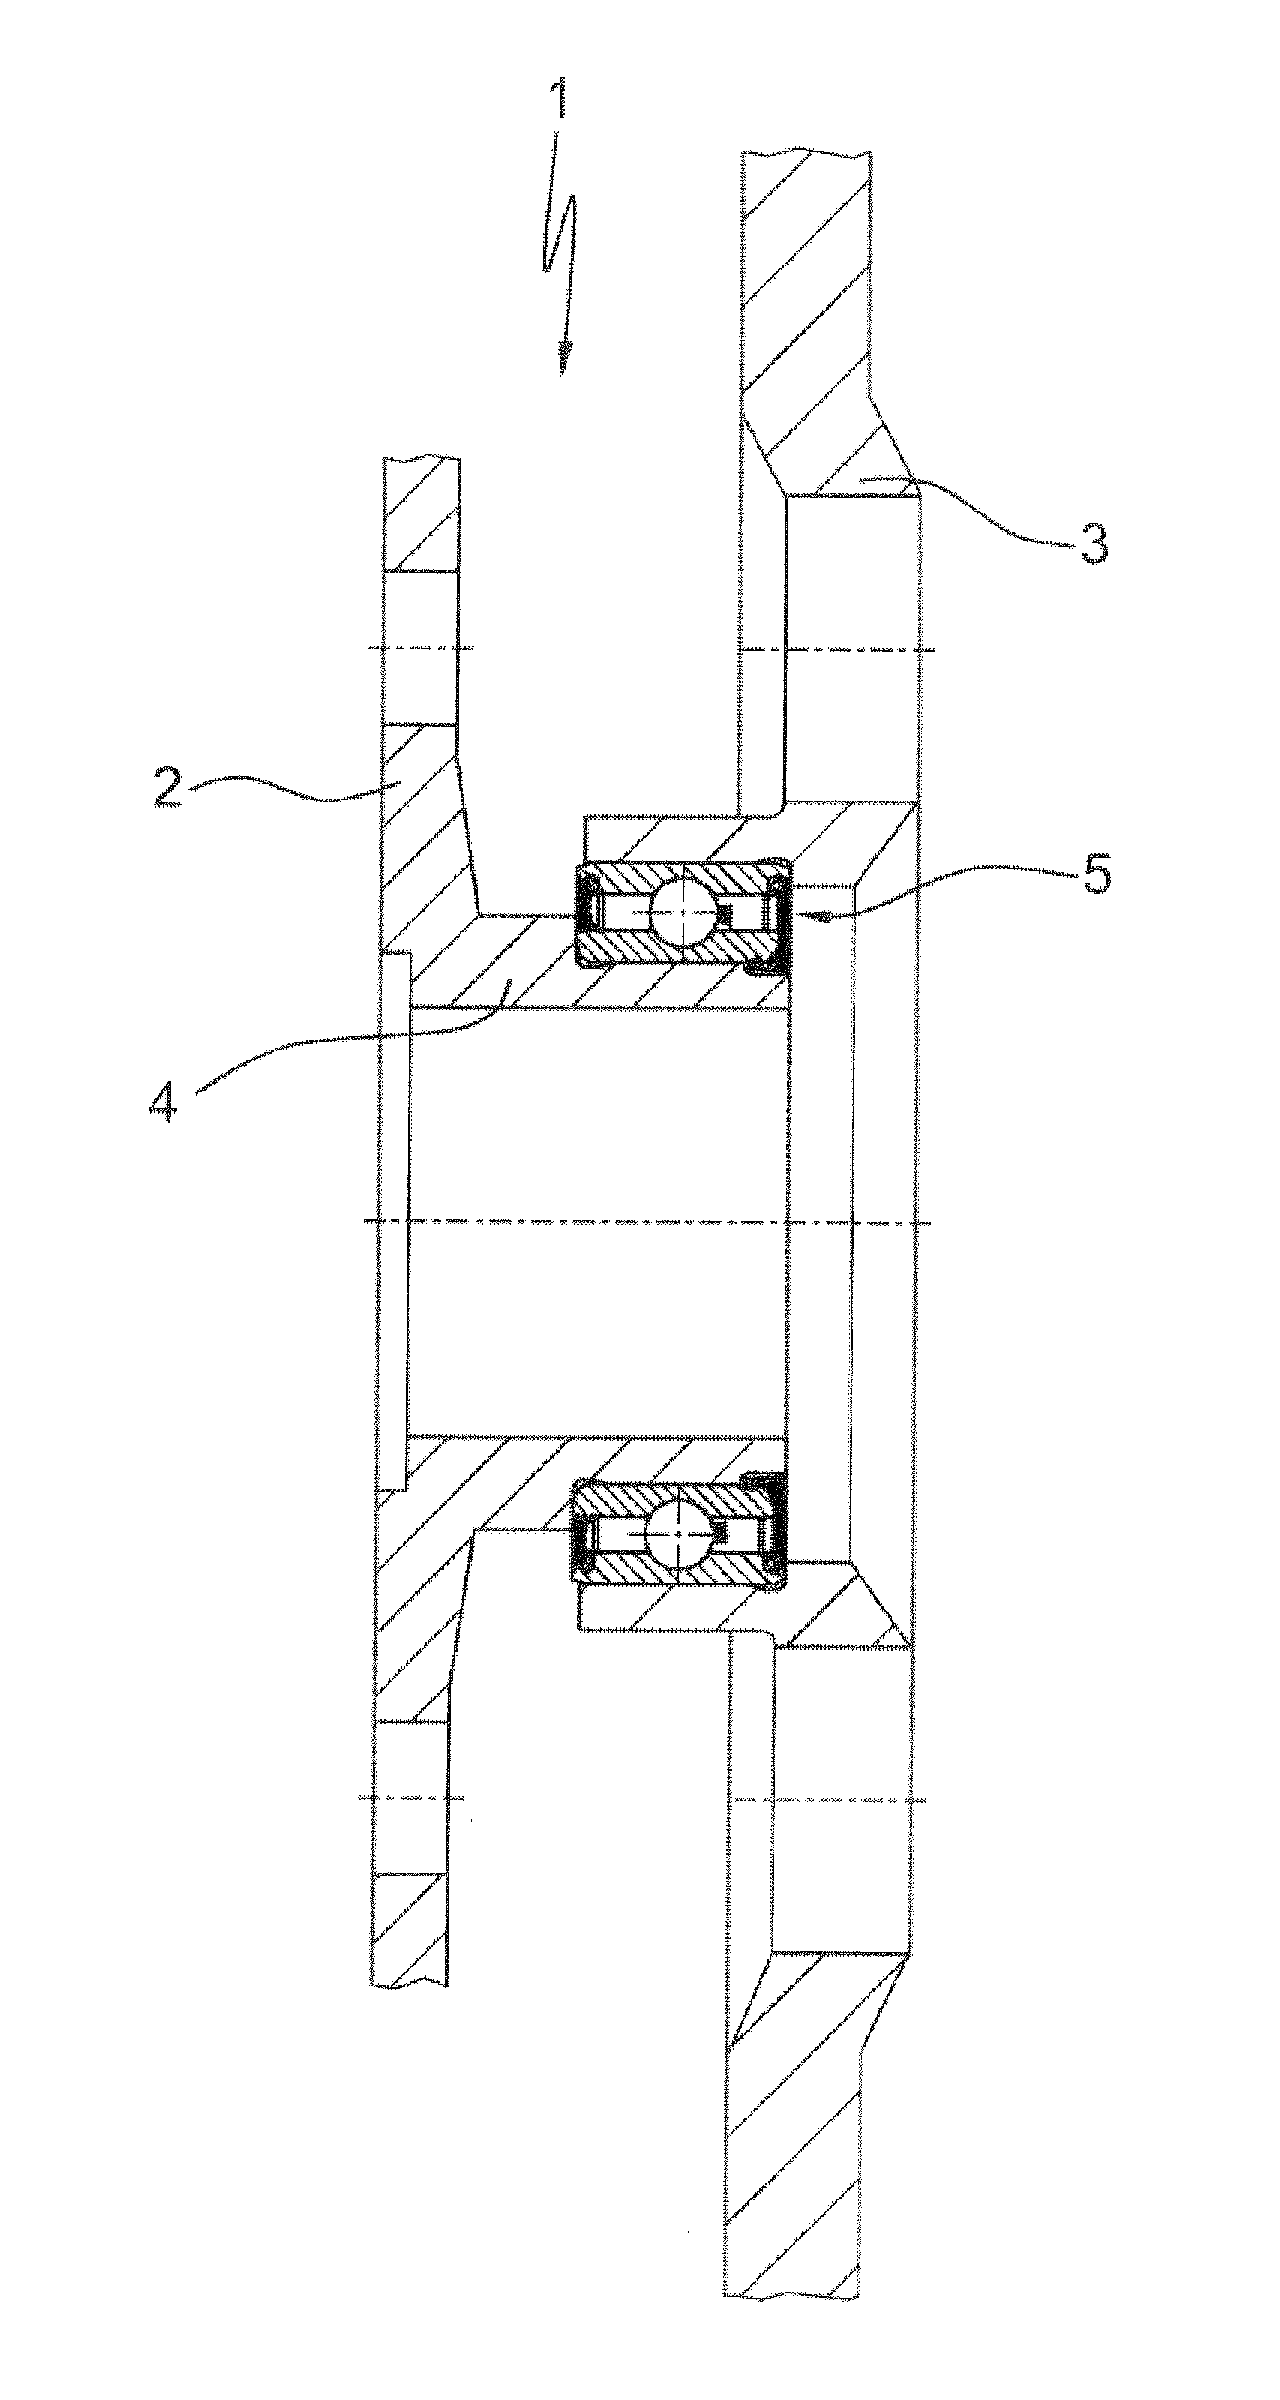 Rolling bearing, particularly single-row deep groove ball bearing for a dual mass flywheel in a motor vehicle